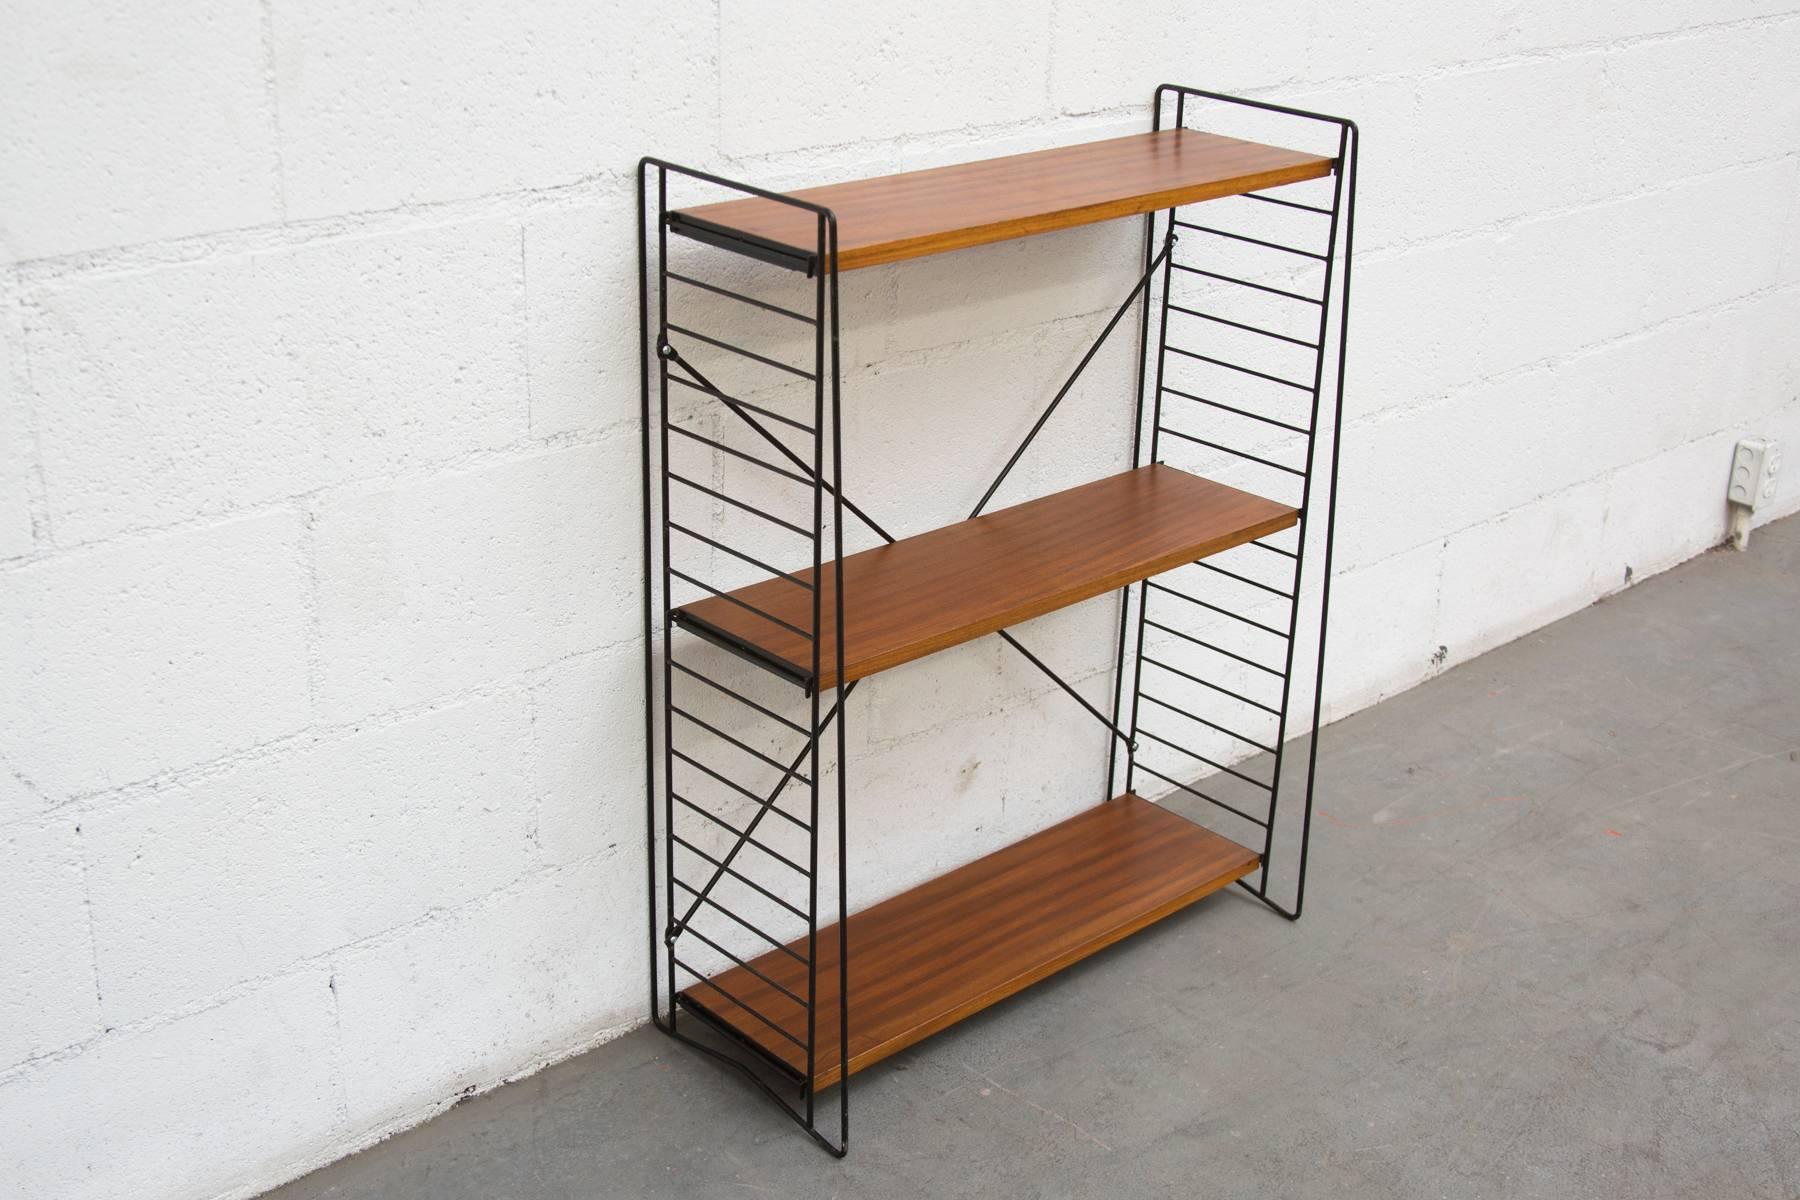 Super smart and sleek standing teak and metal bookshelf unit. Shelves are movable. These units can be flat packed for shipping. Original condition, with some wear.